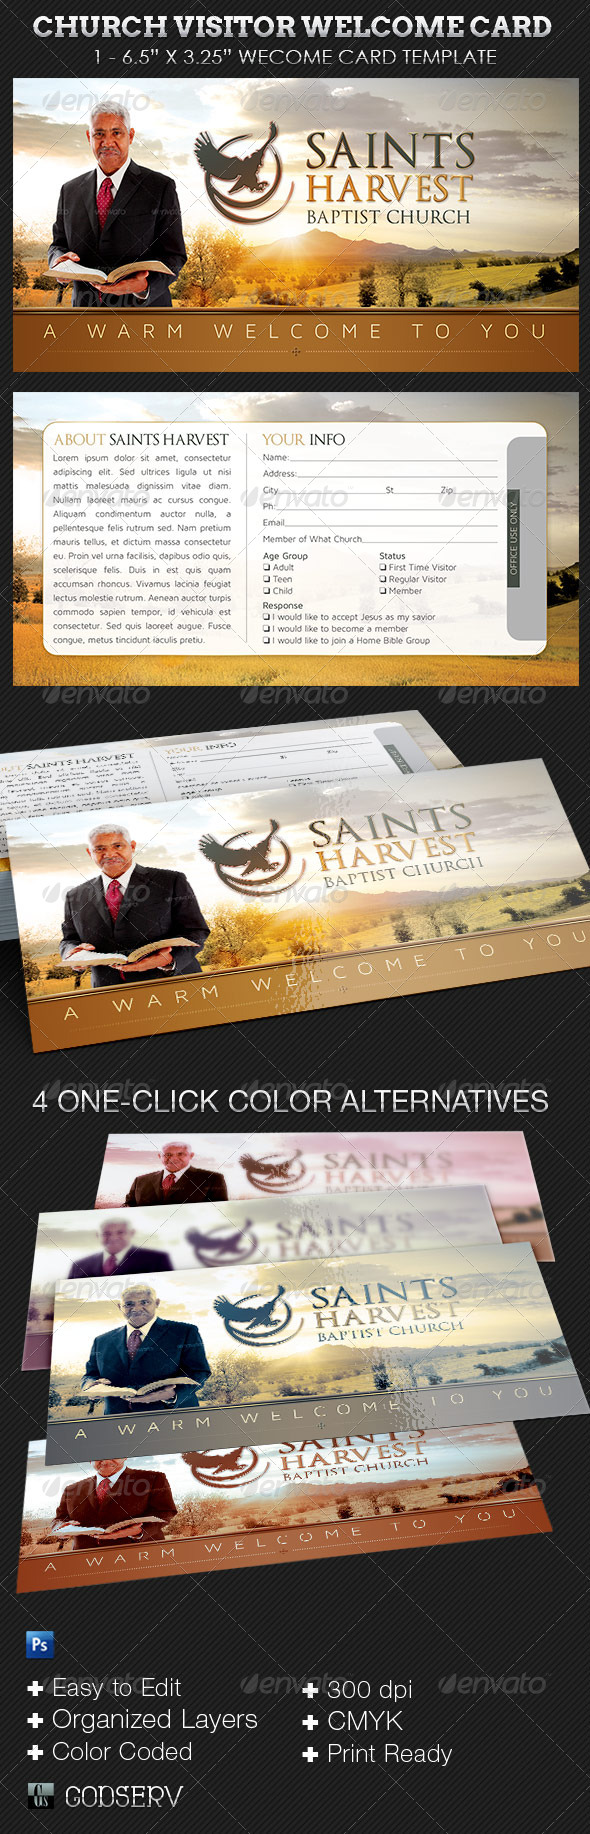 Church Visitor Welcome Card Template GraphicRiver